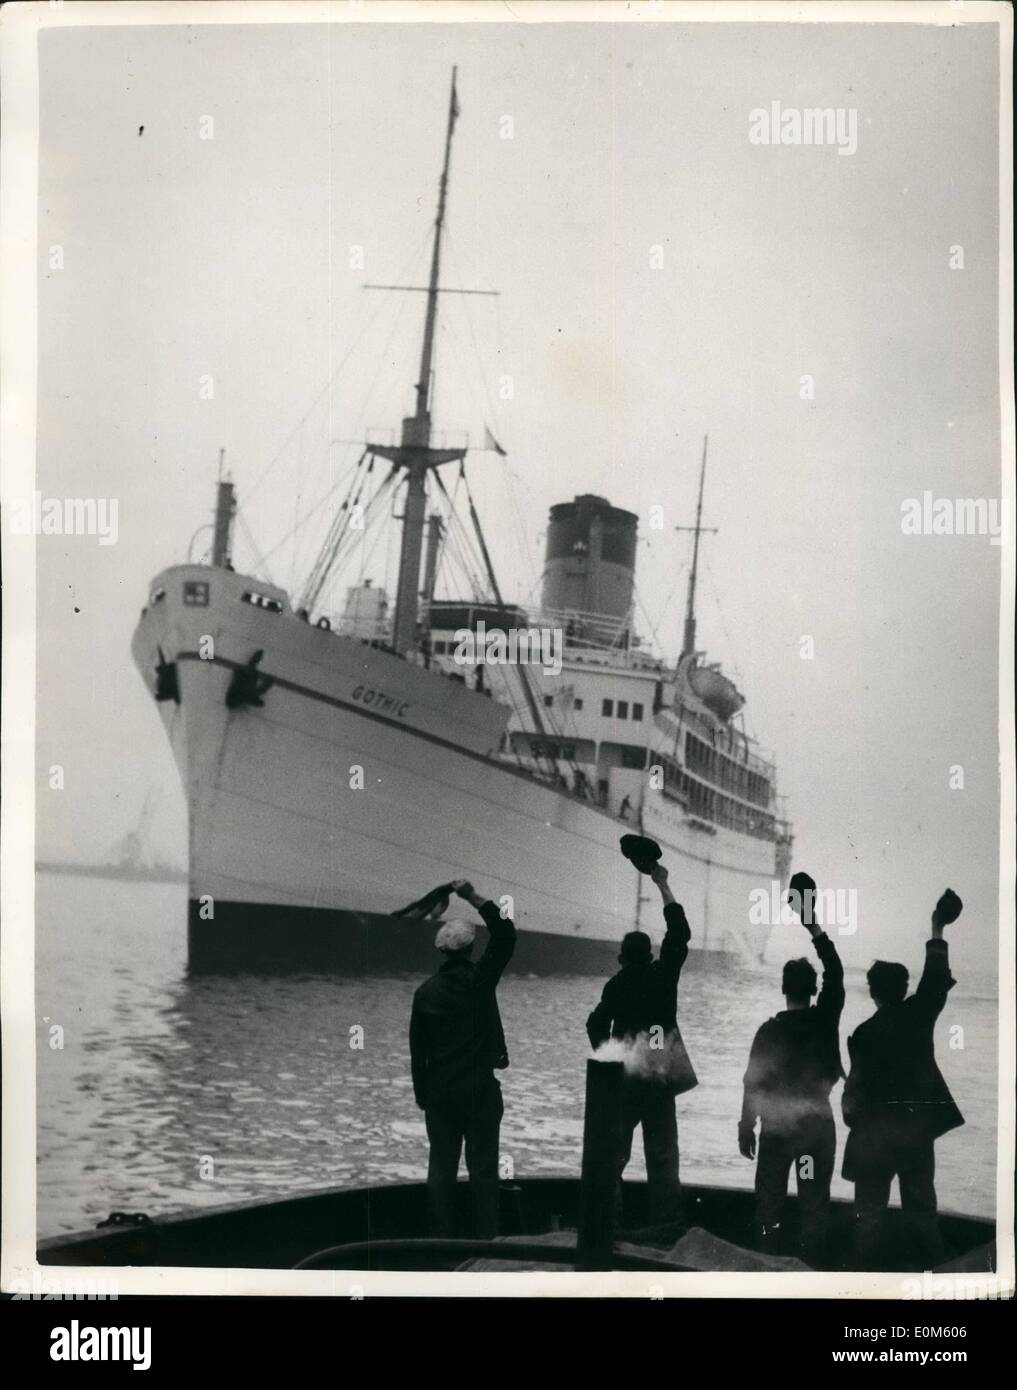 Oct. 10, 1953 - Hats off as the Royal Liner Sails up the River Thames.: The Gothic passes Gravesend, and tugmen cheer her on her way to King George V. Dock yesterday. The 15,902-ton liner left Liverpool on Monday for Jamaica, via Portland and London. The Queen and the Duke of Edinburgh are flying to Jamaica on November 25 on the start of their Commonwealth tour . Four days later they will go on the Gothic, Stock Photo